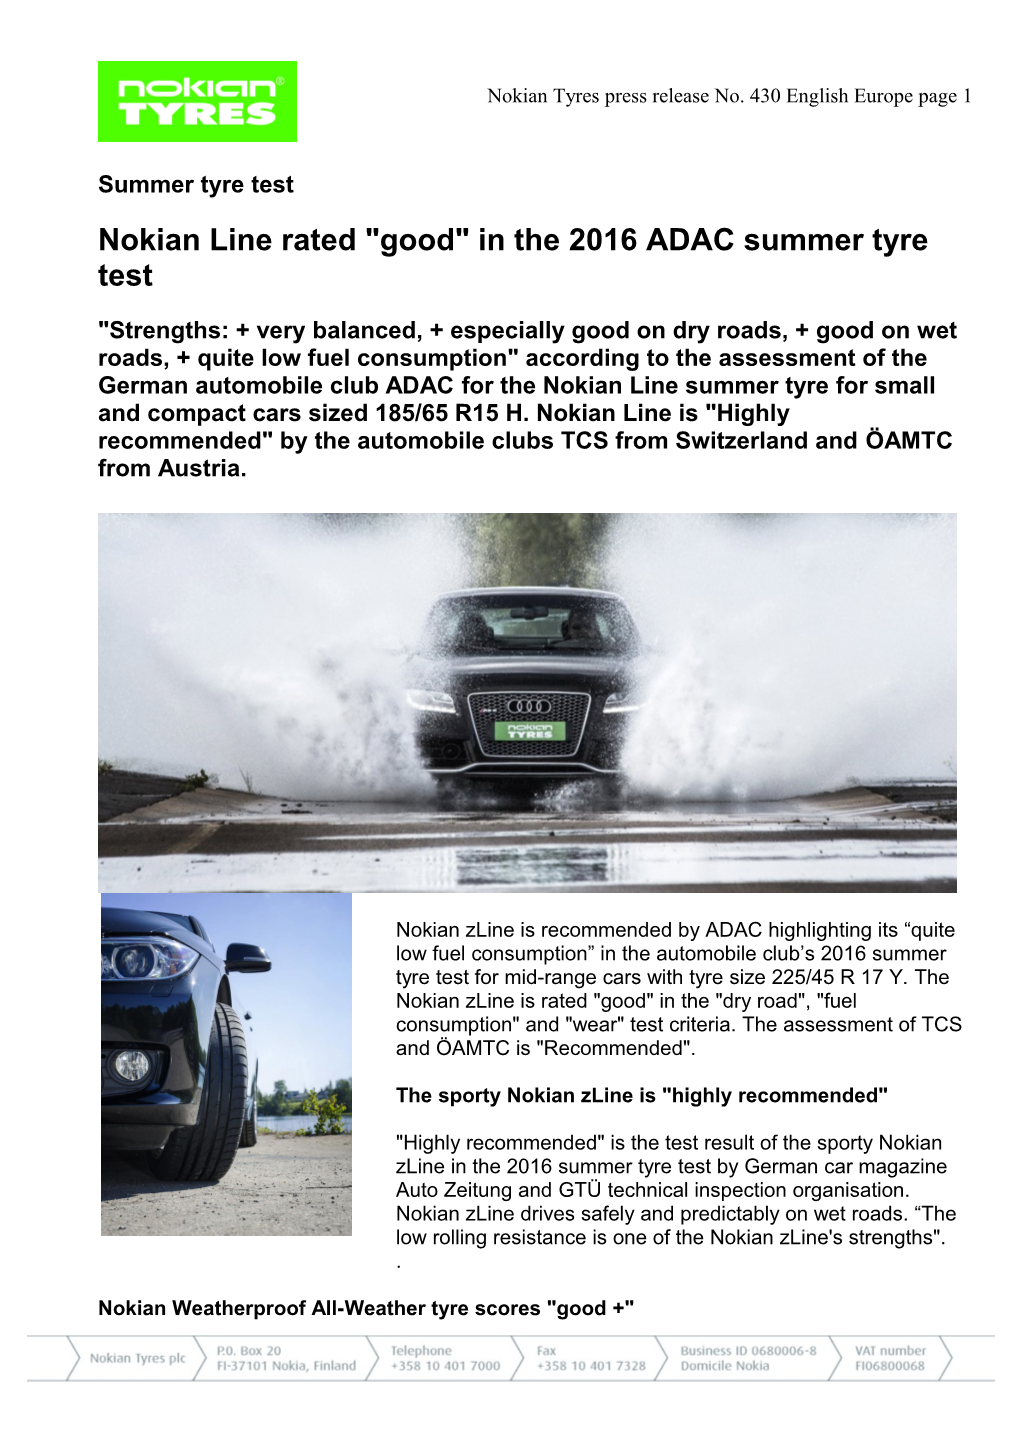 Nokian Tyres Press Release No. 430 English Europe Page 1